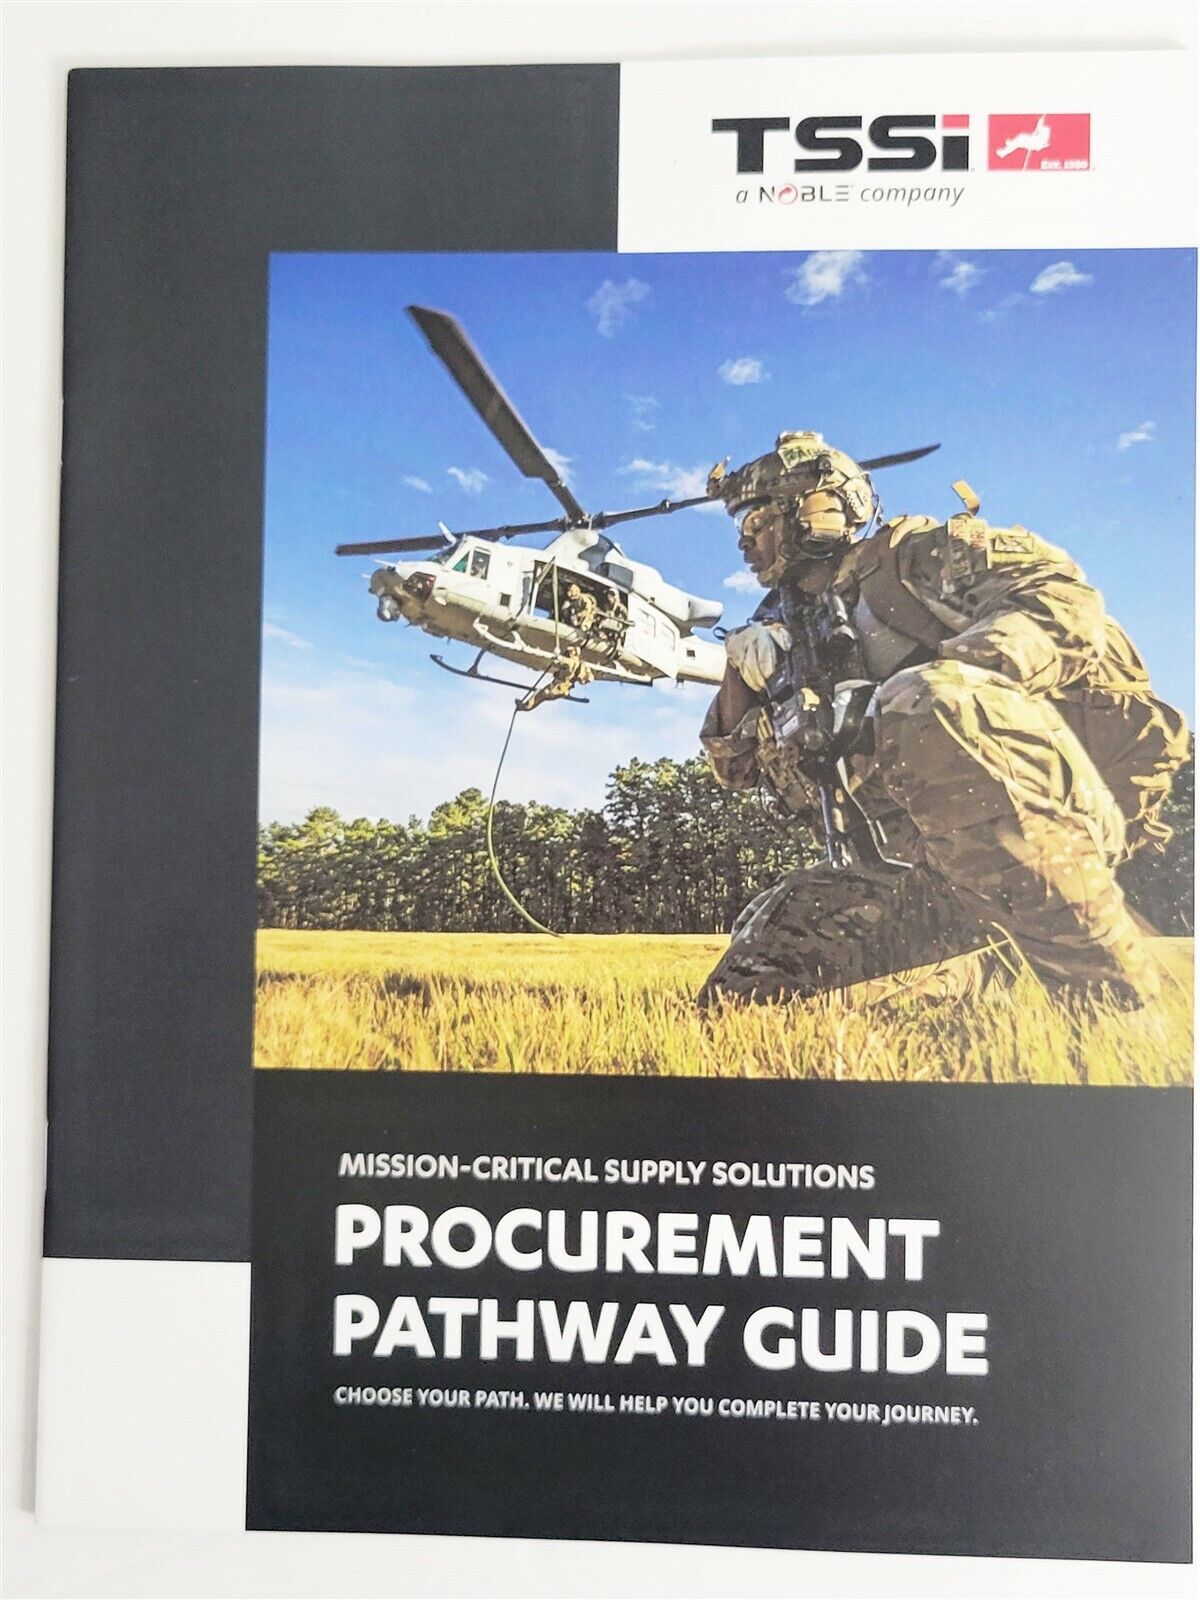 TSSI Procurement Pathway Guide Booklet 21 Pages 2021 Military